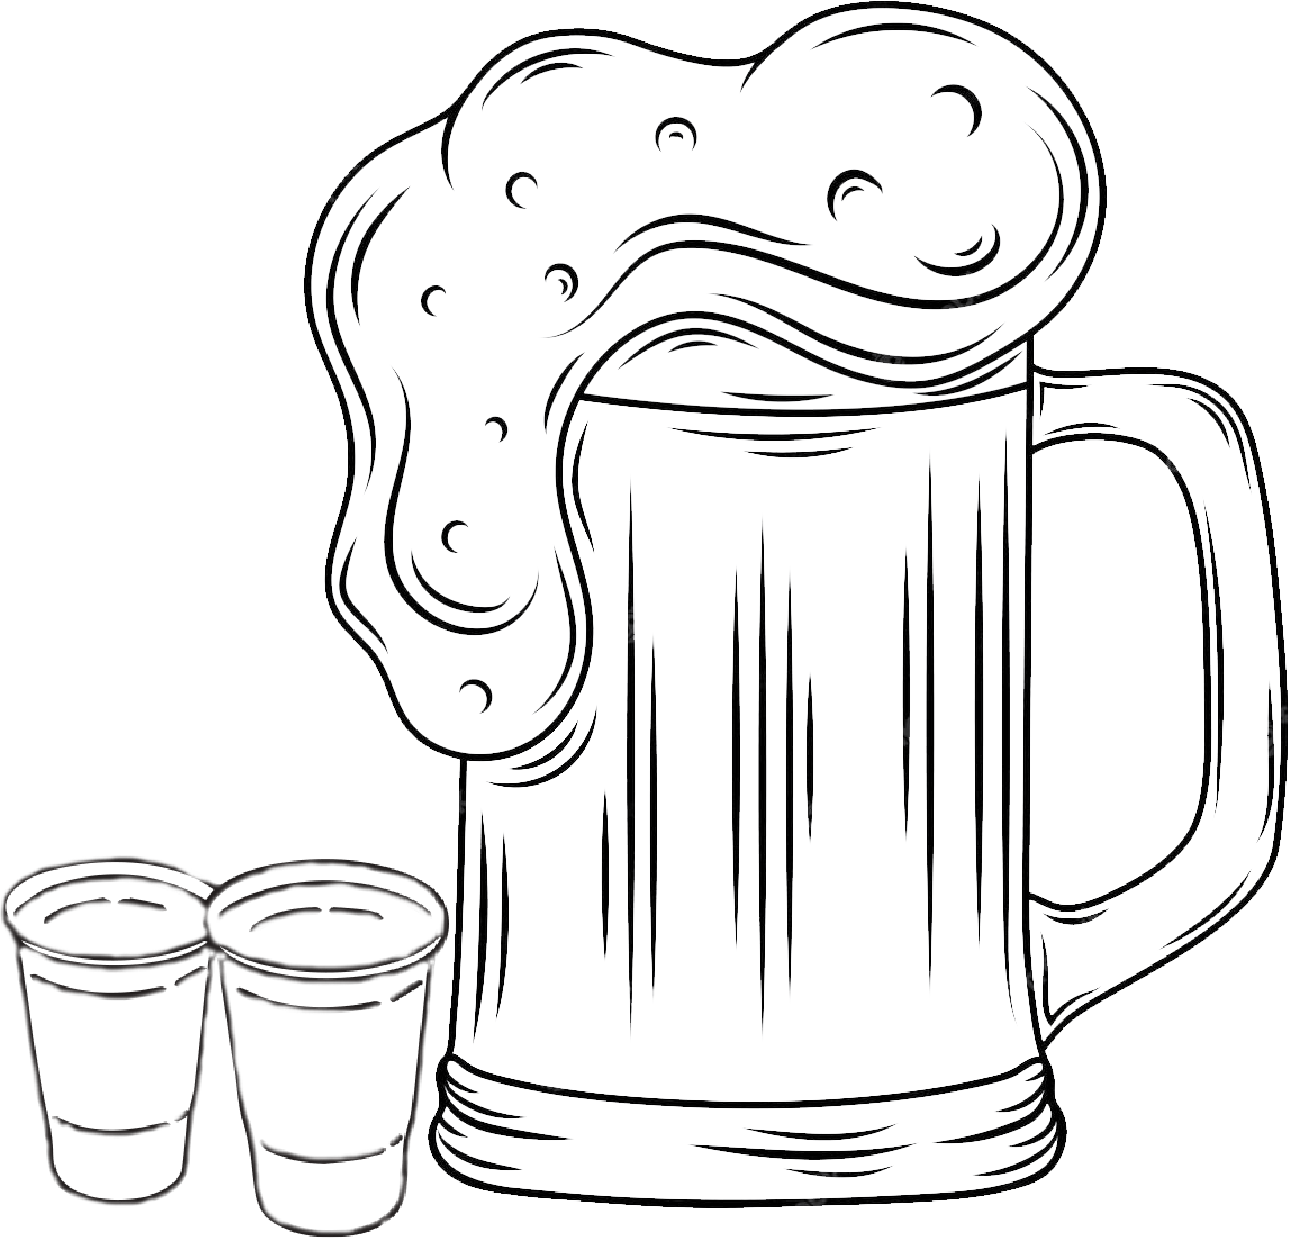 Pitcher and cups